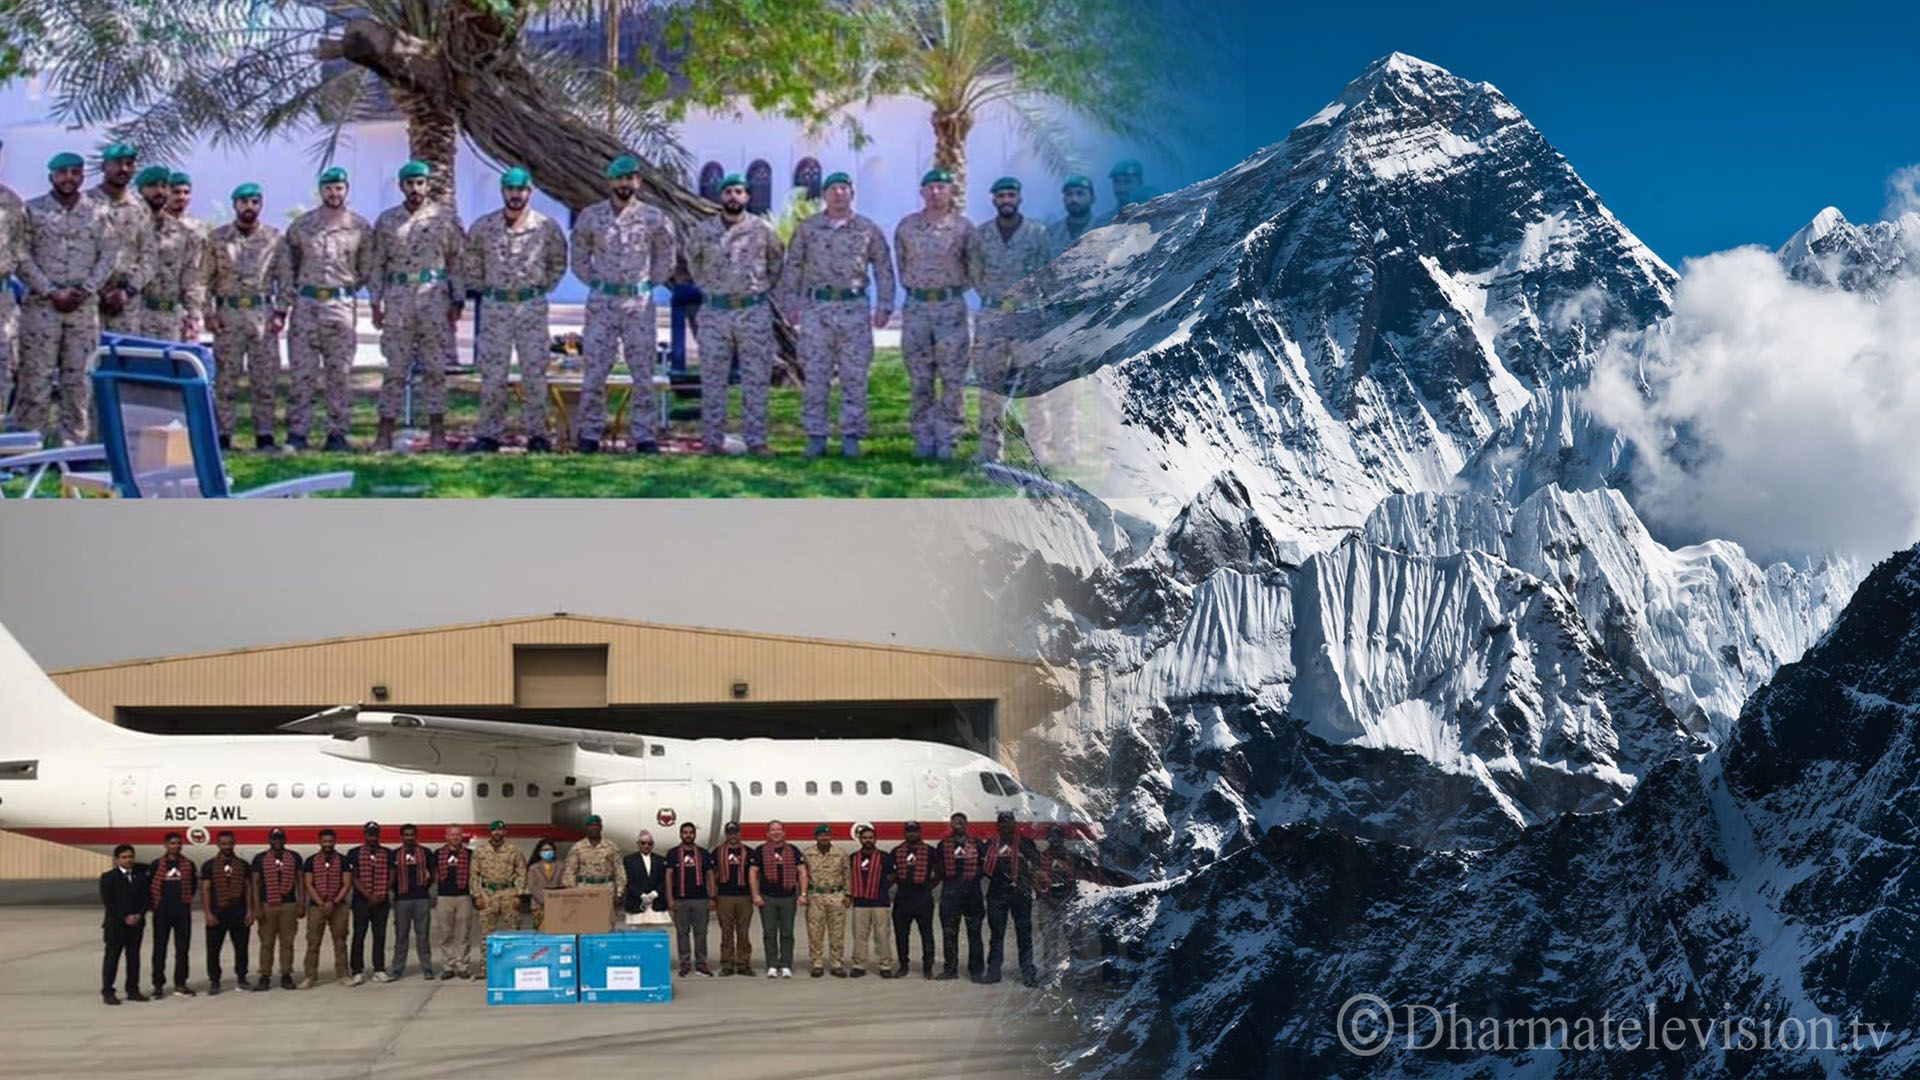 Team including members of Bahraini royal family arrived in Nepal to climb Mt. Everest